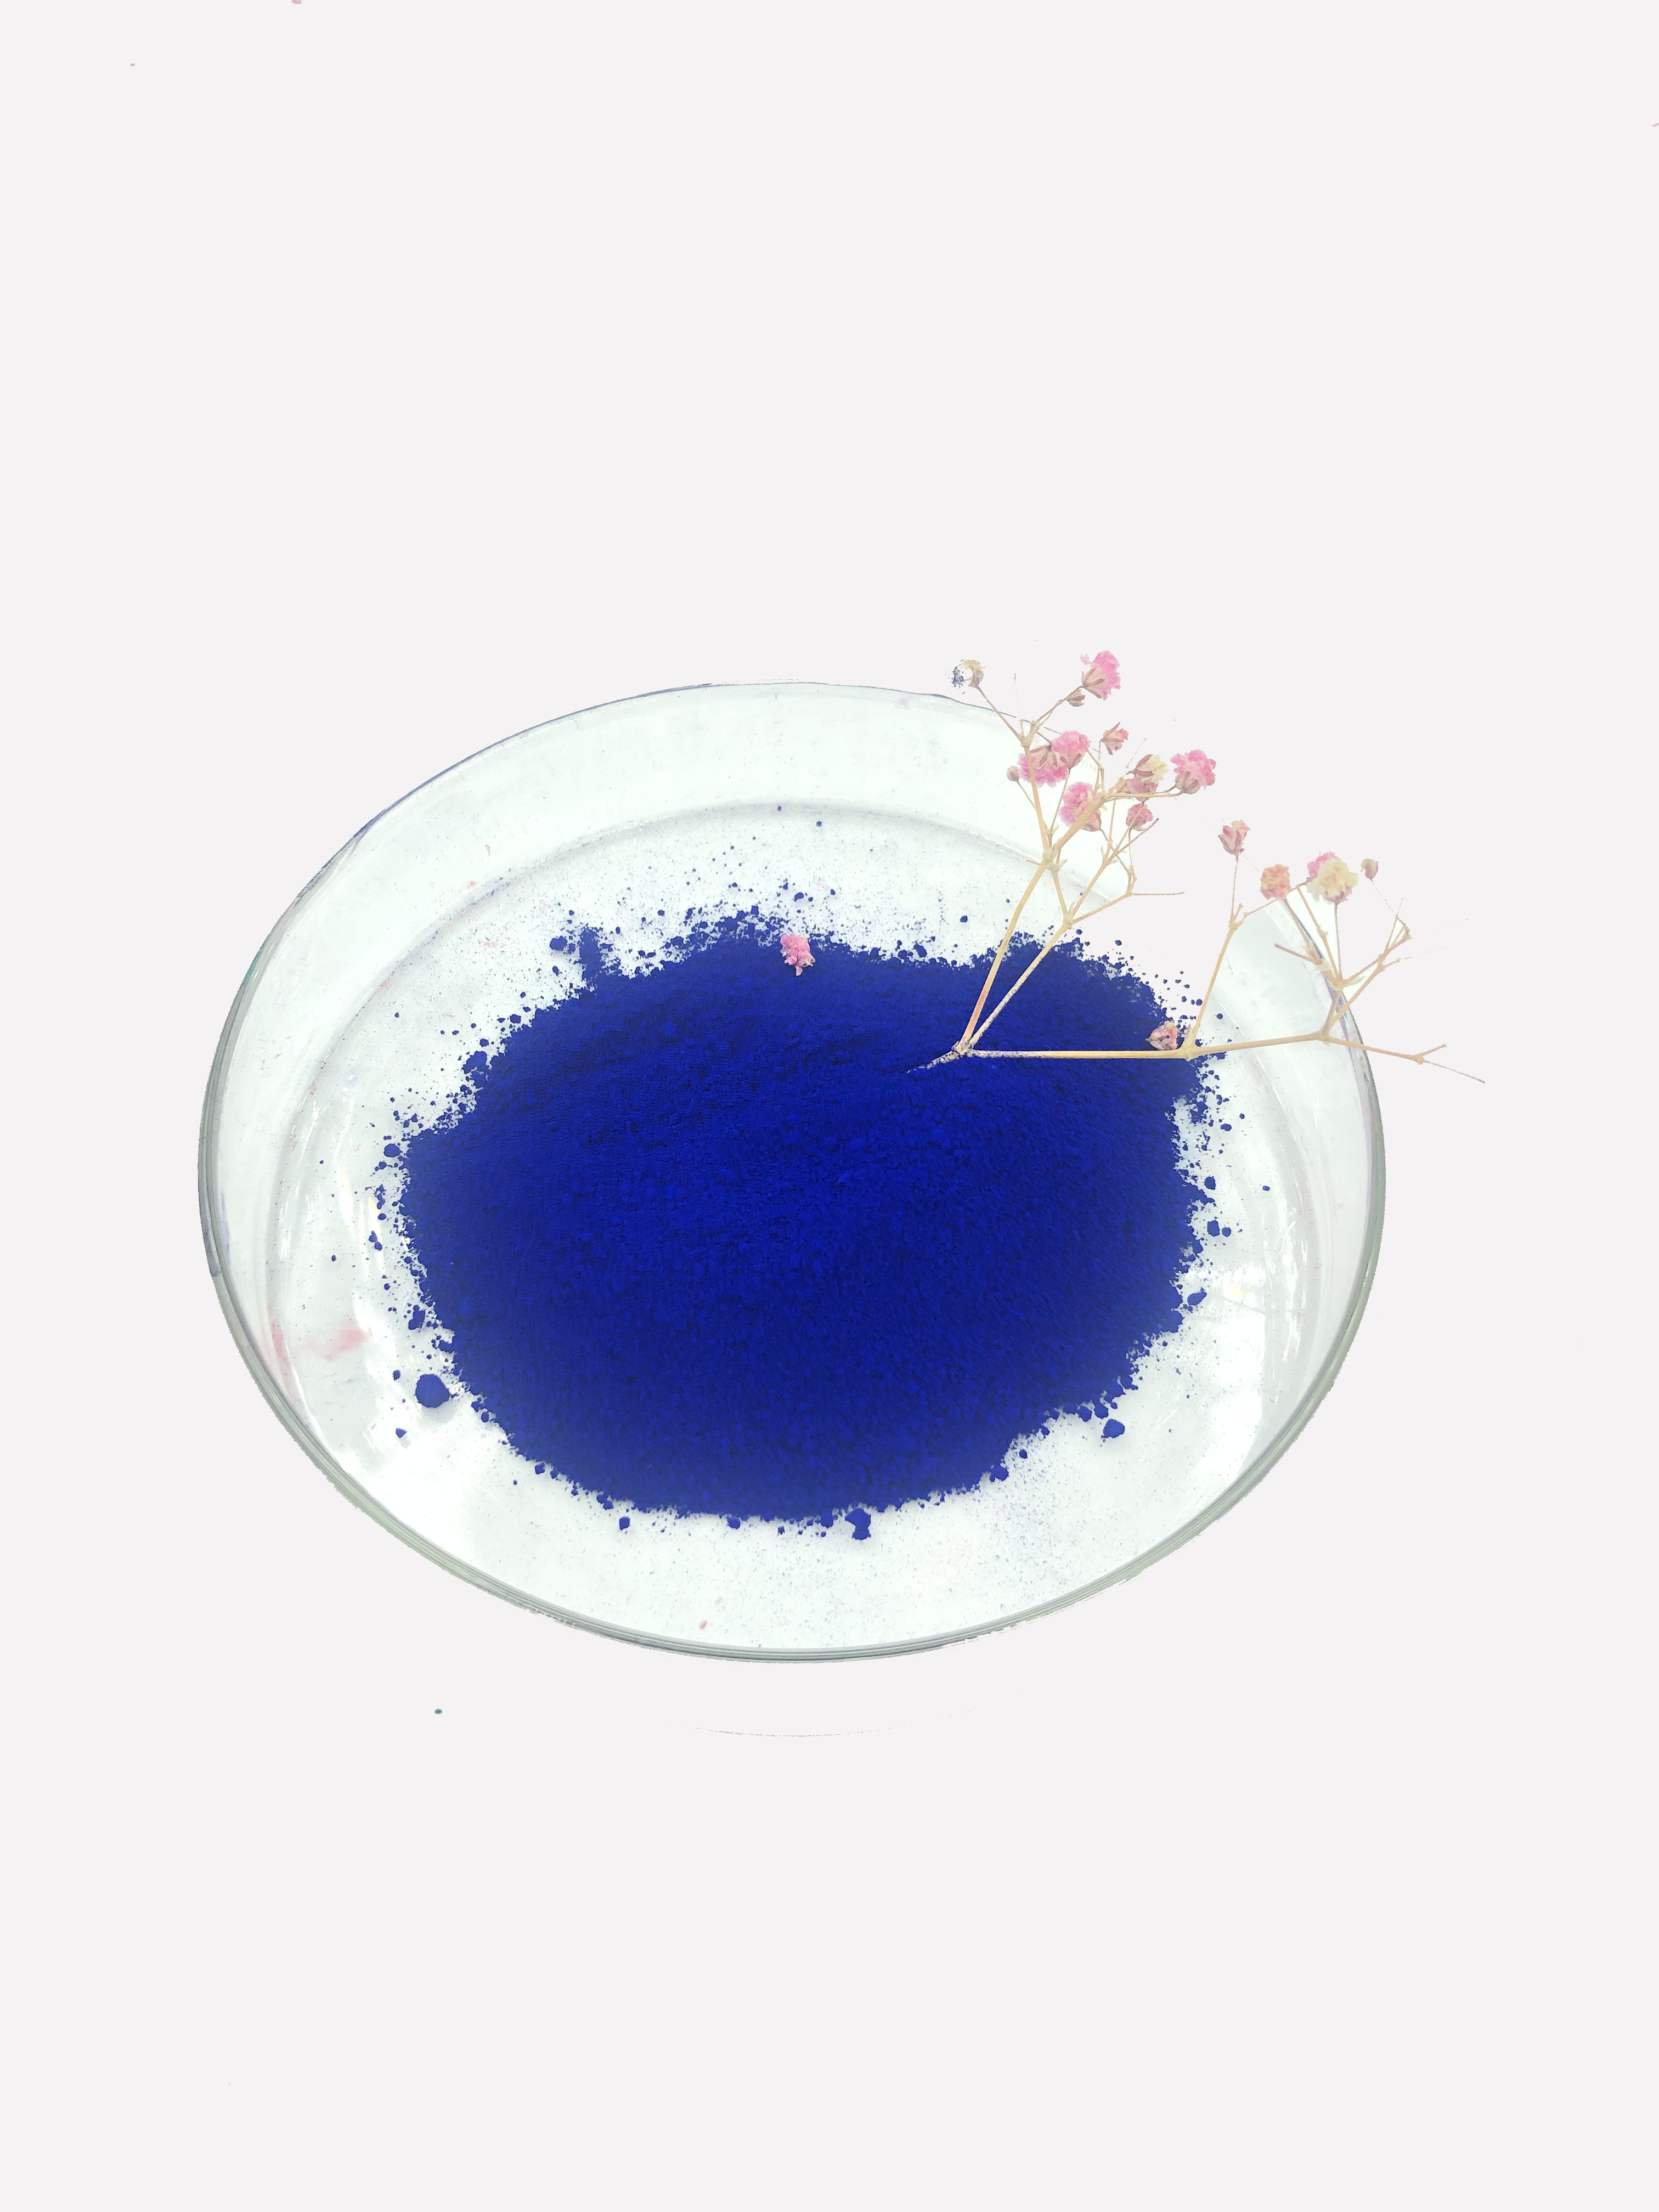 Disperse Blue 60 150% For Acetate Fiber And Nylon Strong Tinting Strength with Great High Temperature Resistance 